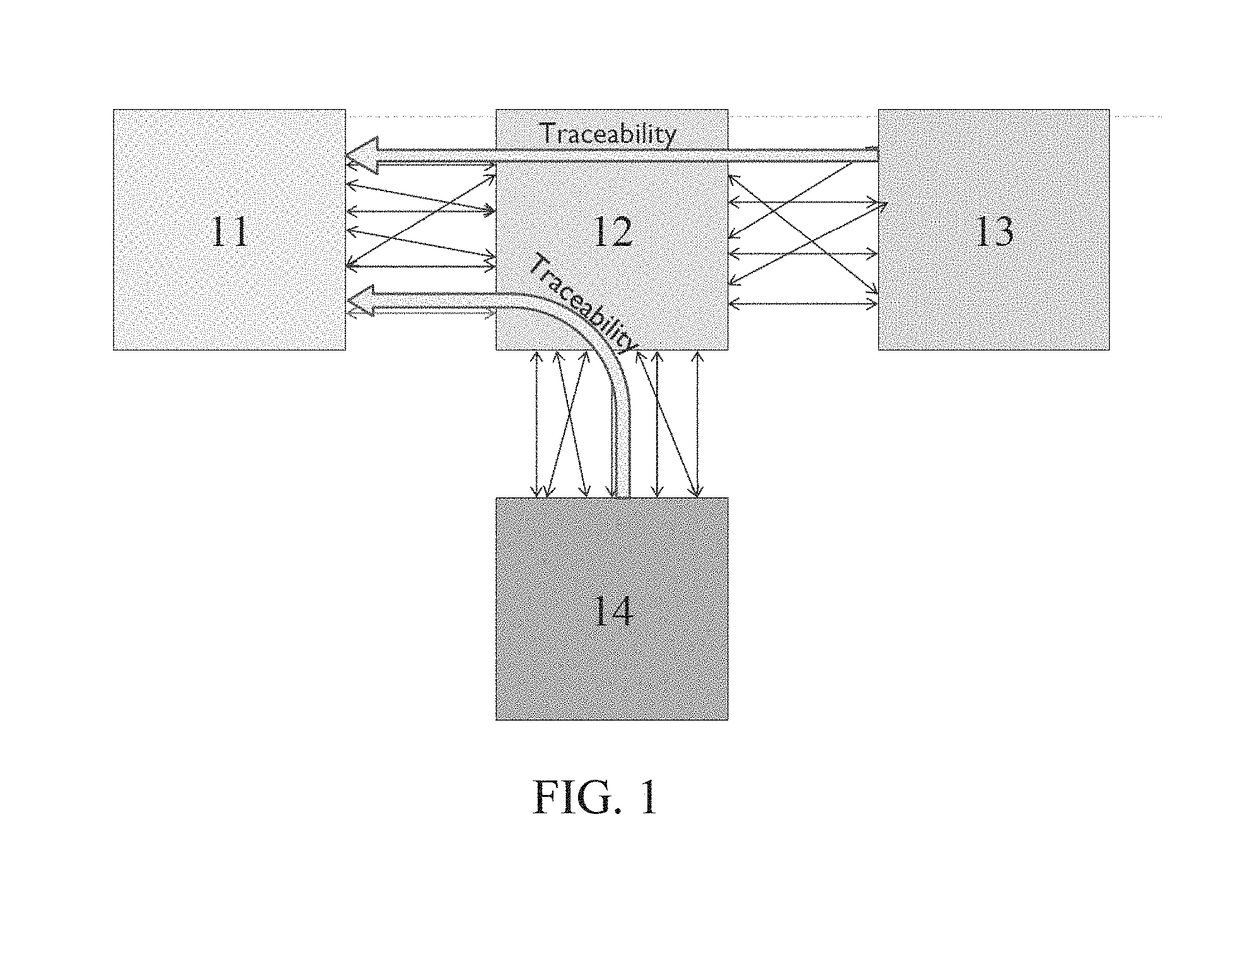 Product development management system and method